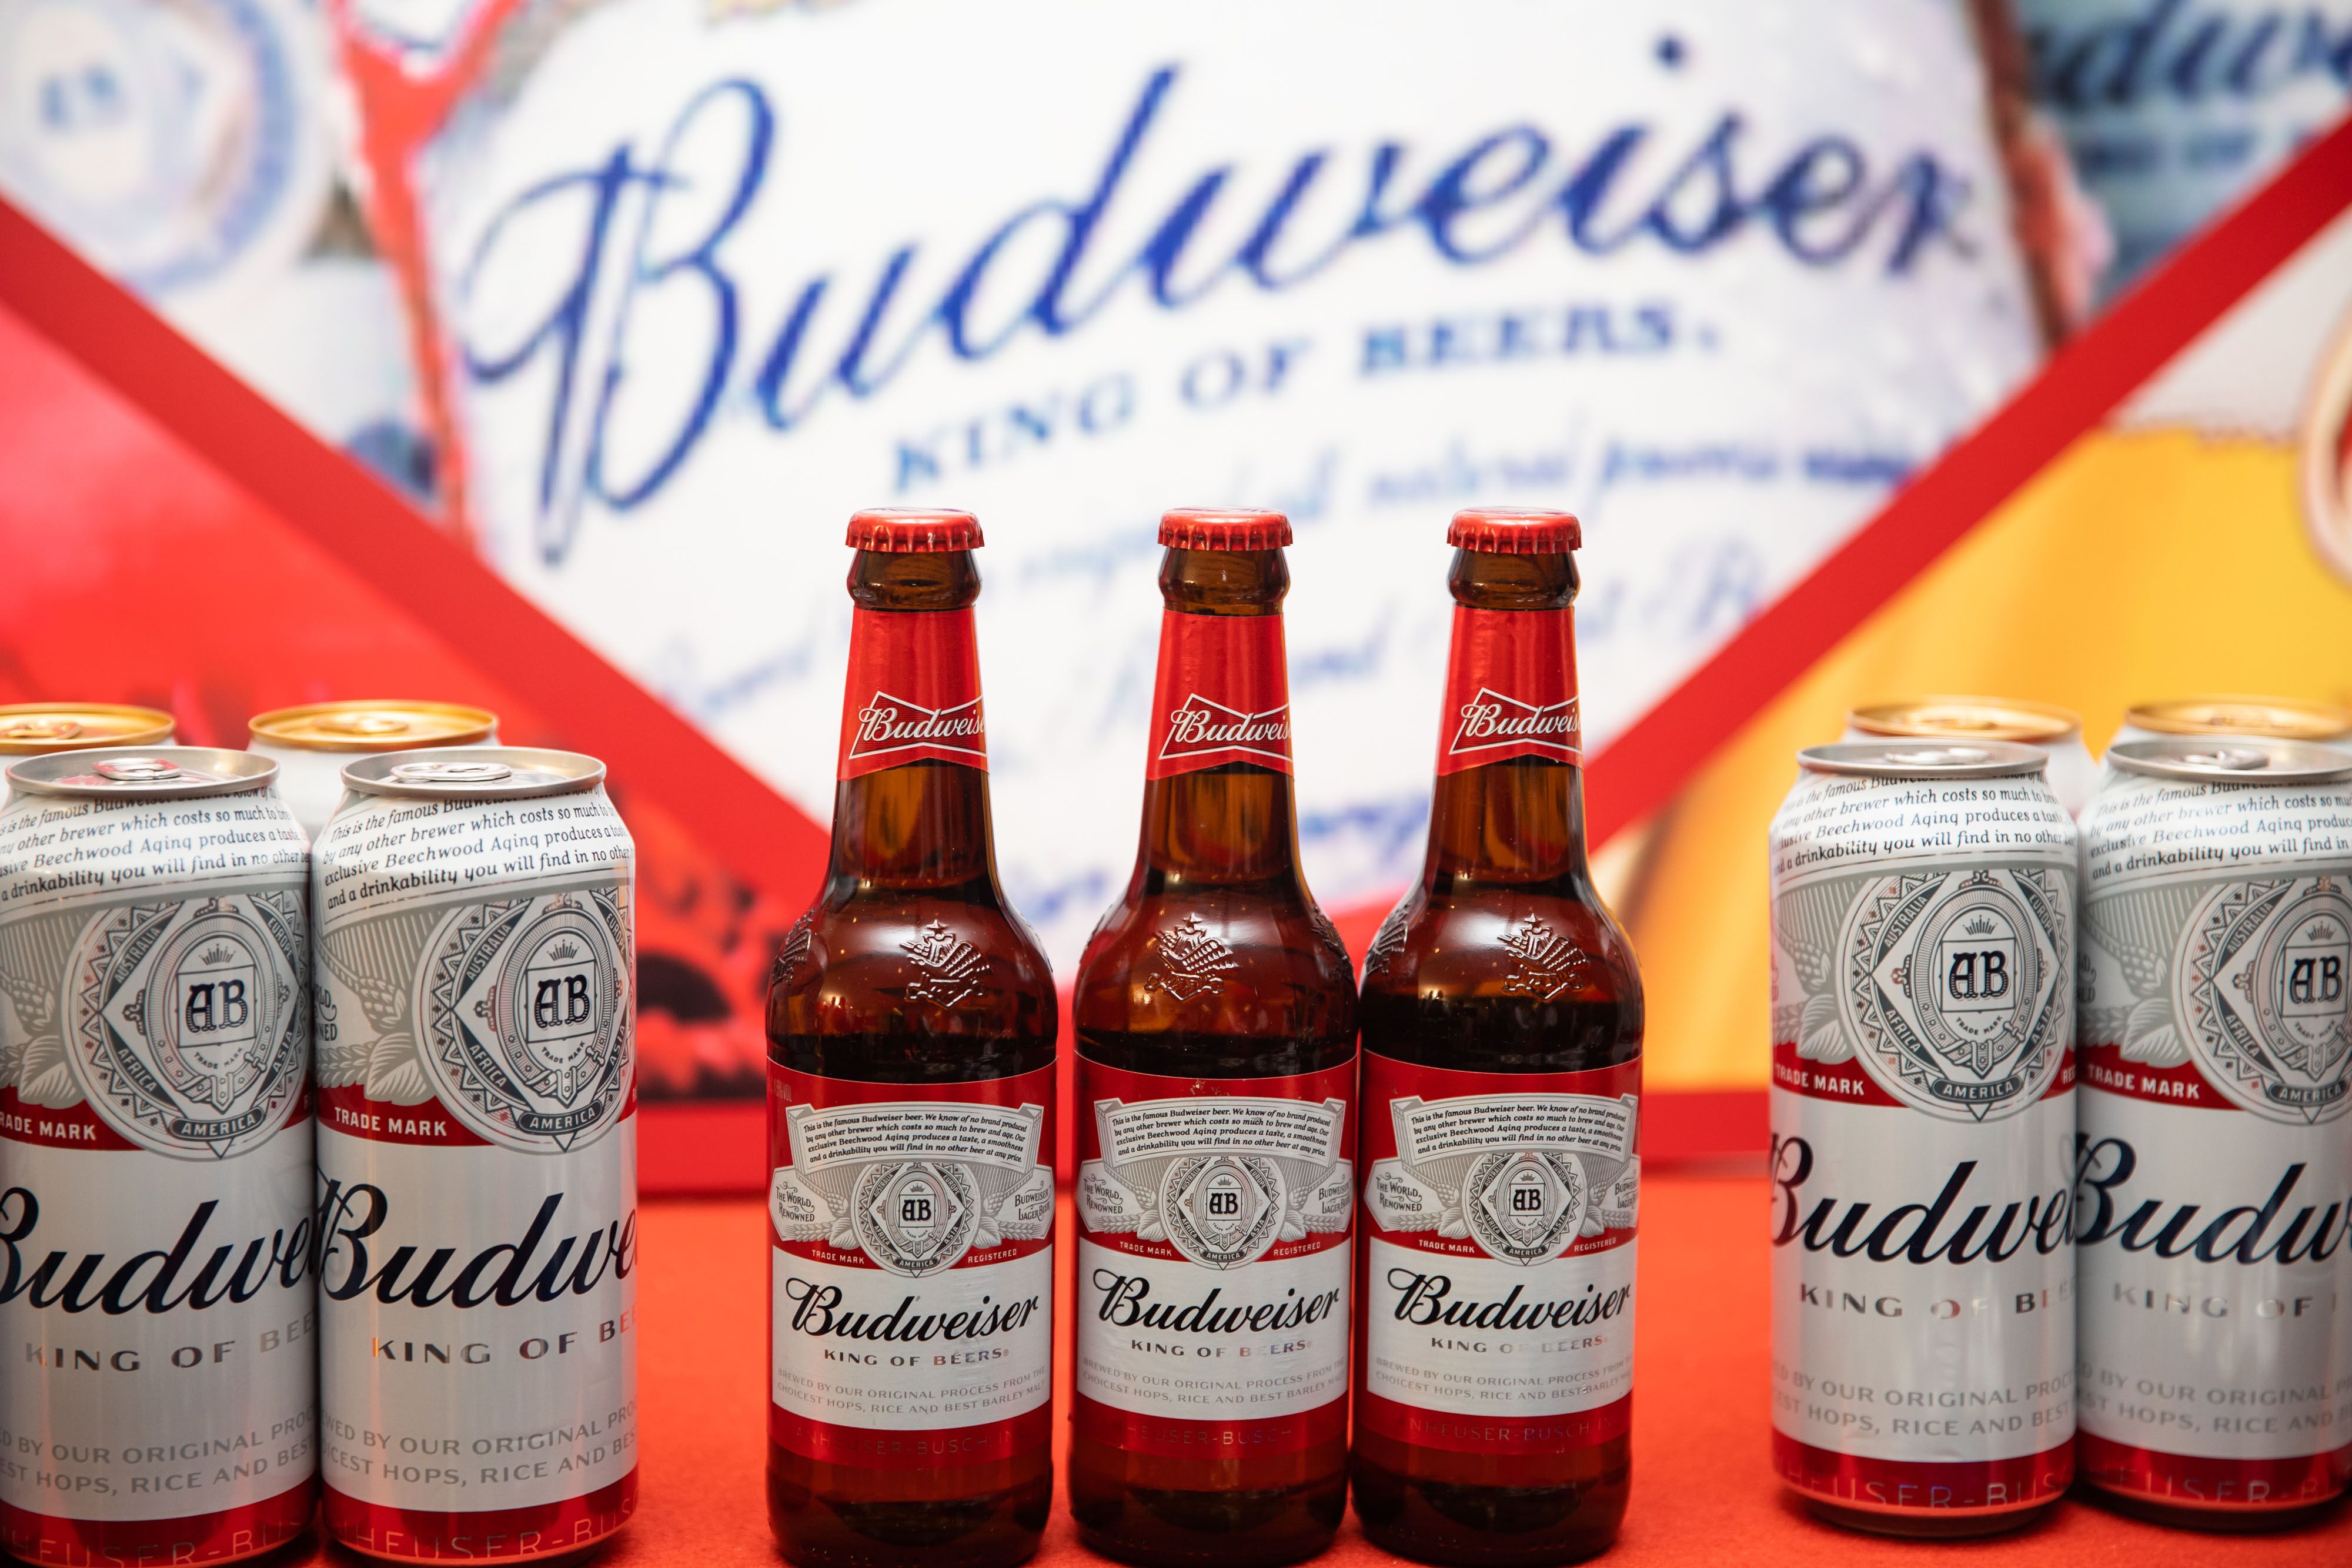 Budweiser beers manufactured by Anheuser-Busch InBev sit on display during a news conference in Hong Kong in July 2019. Photo: Bloomberg